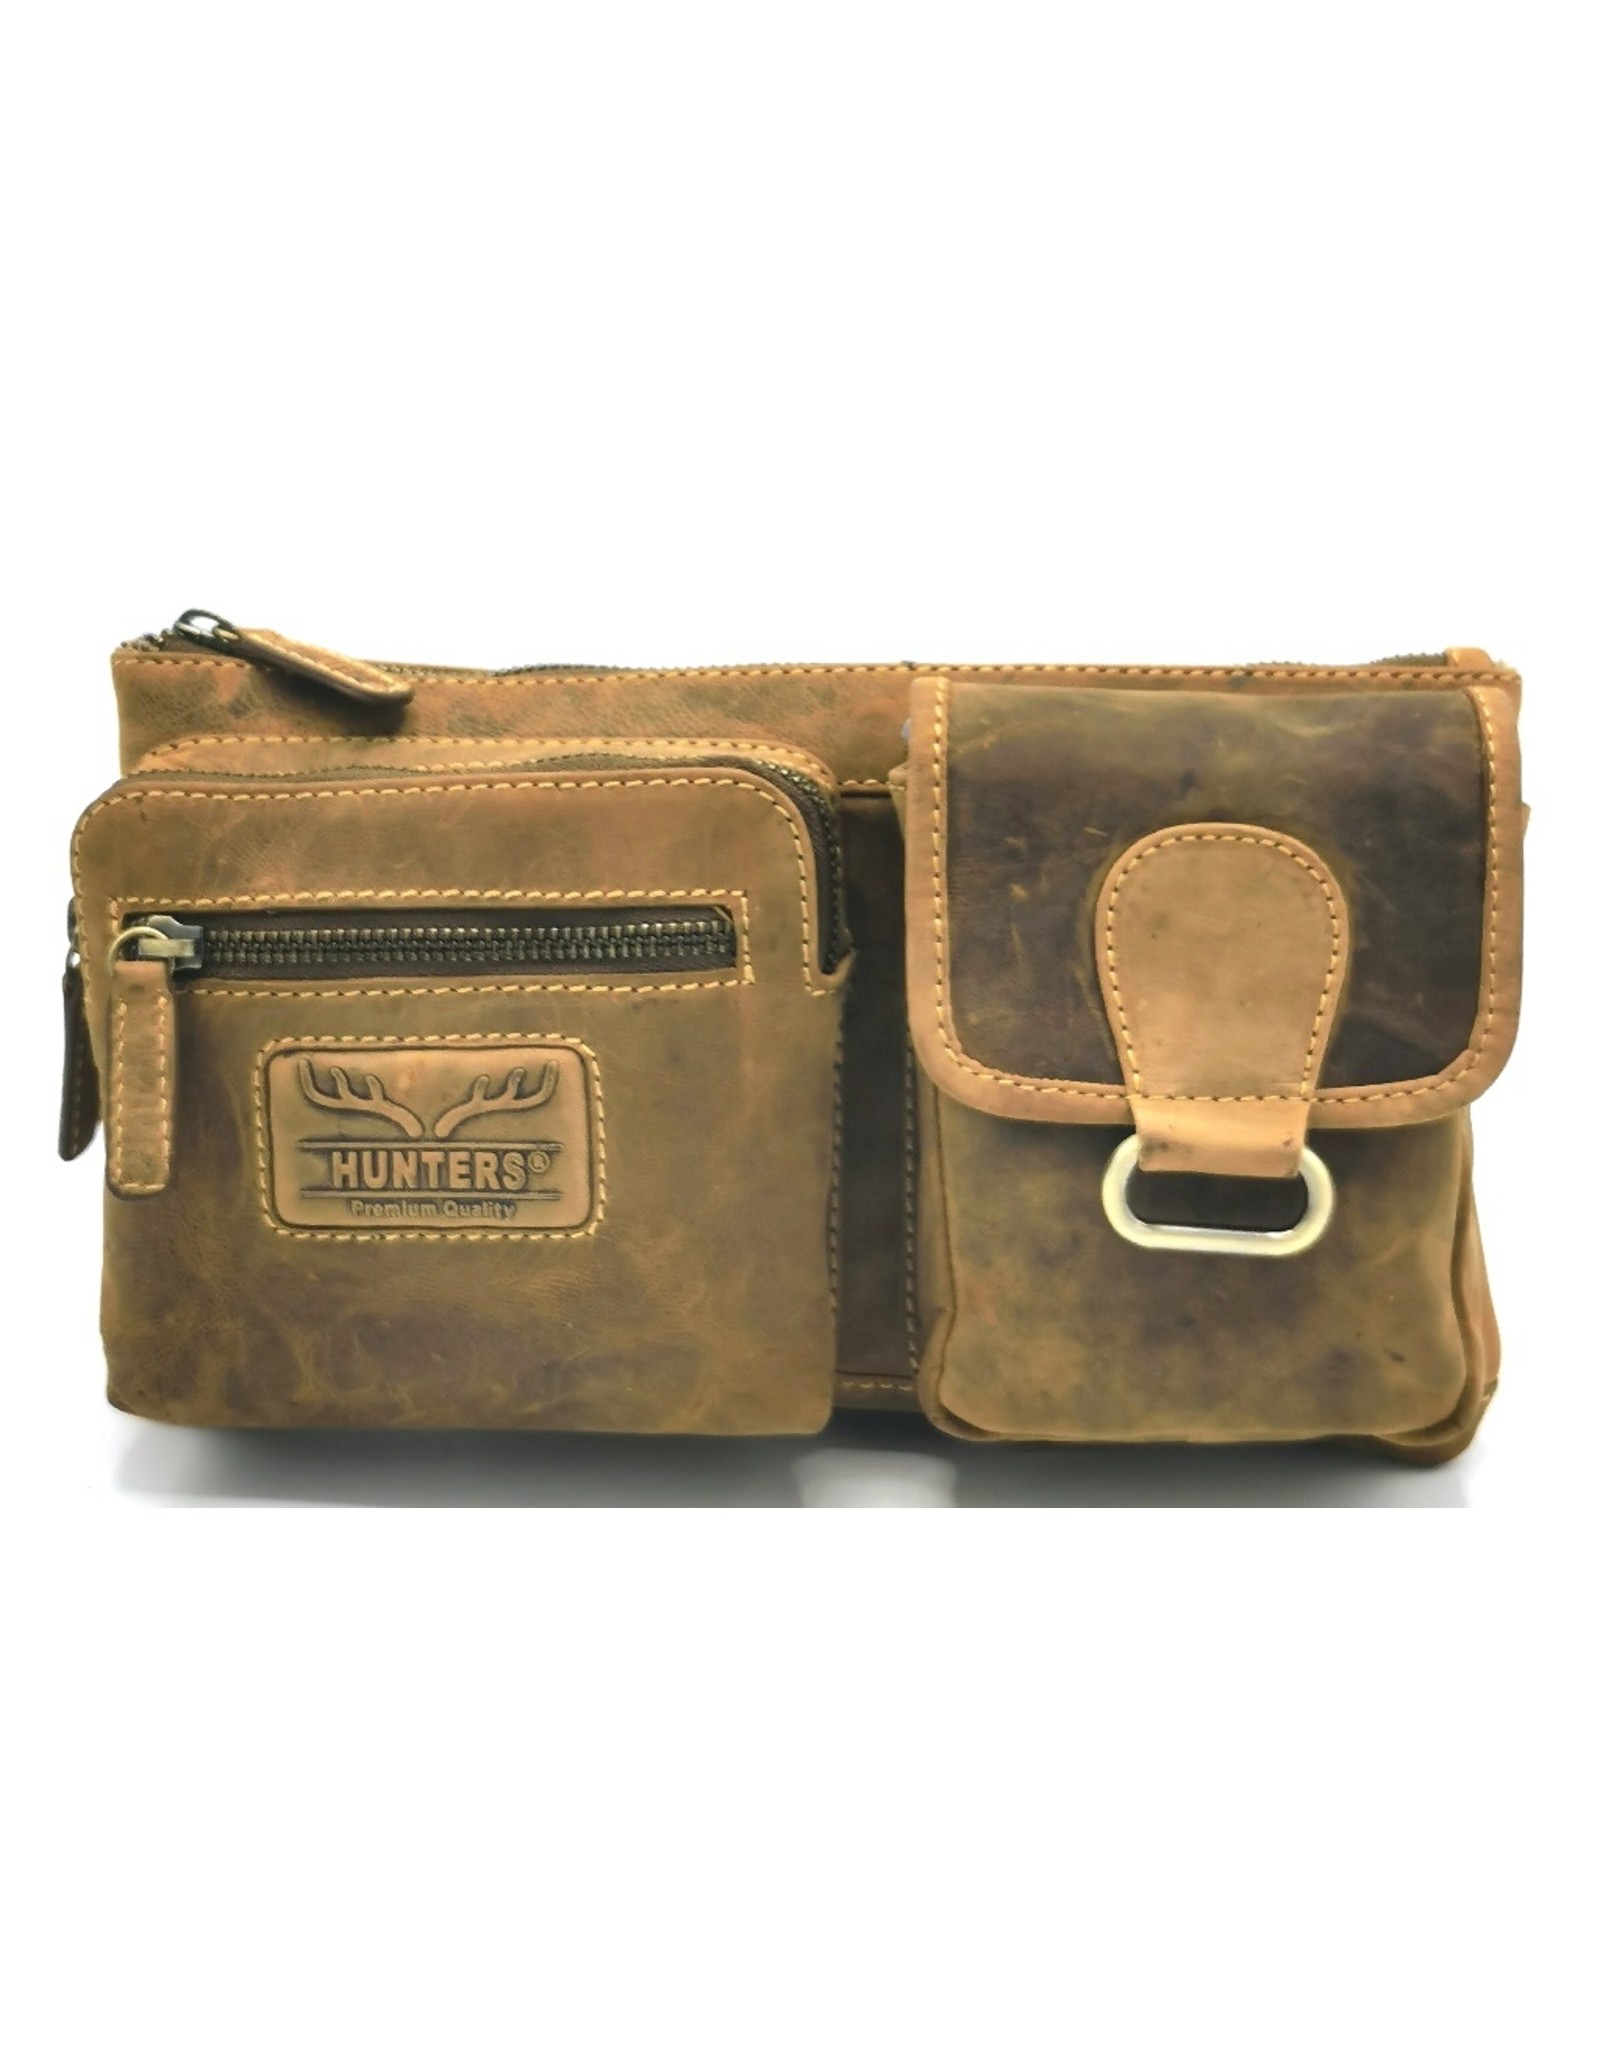 Hunters Leather Festival bags, waist bags and belt bags - Hunters Waist bag - Crossbody bag Buffalo Leather